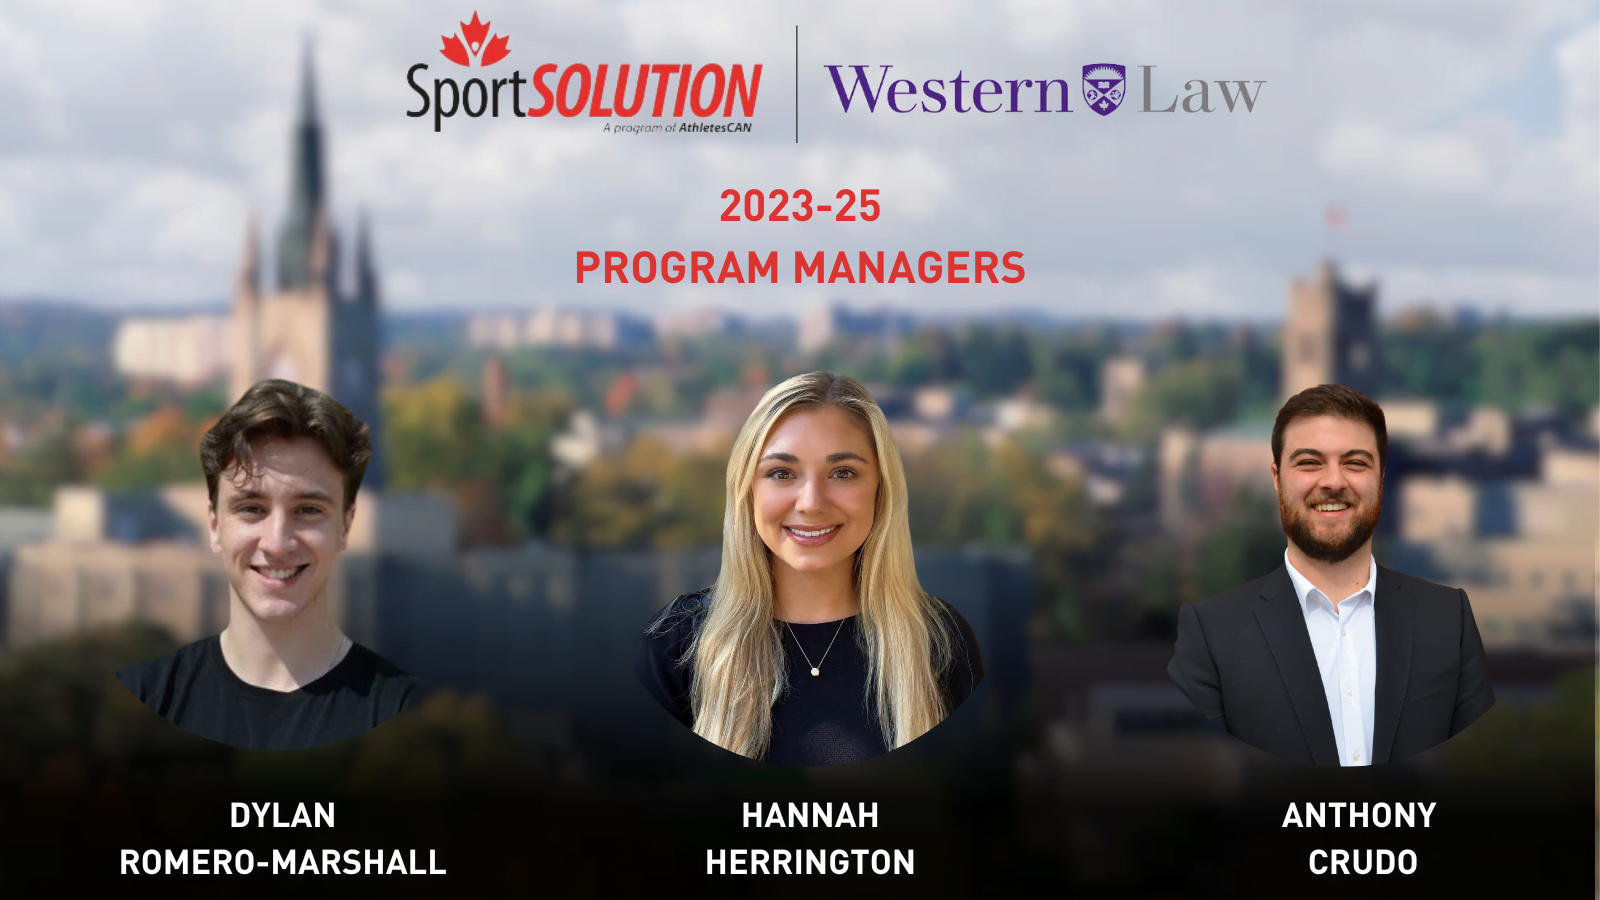 AthletesCAN, Western Law announce 2023-25 Sport Solution Program Managers